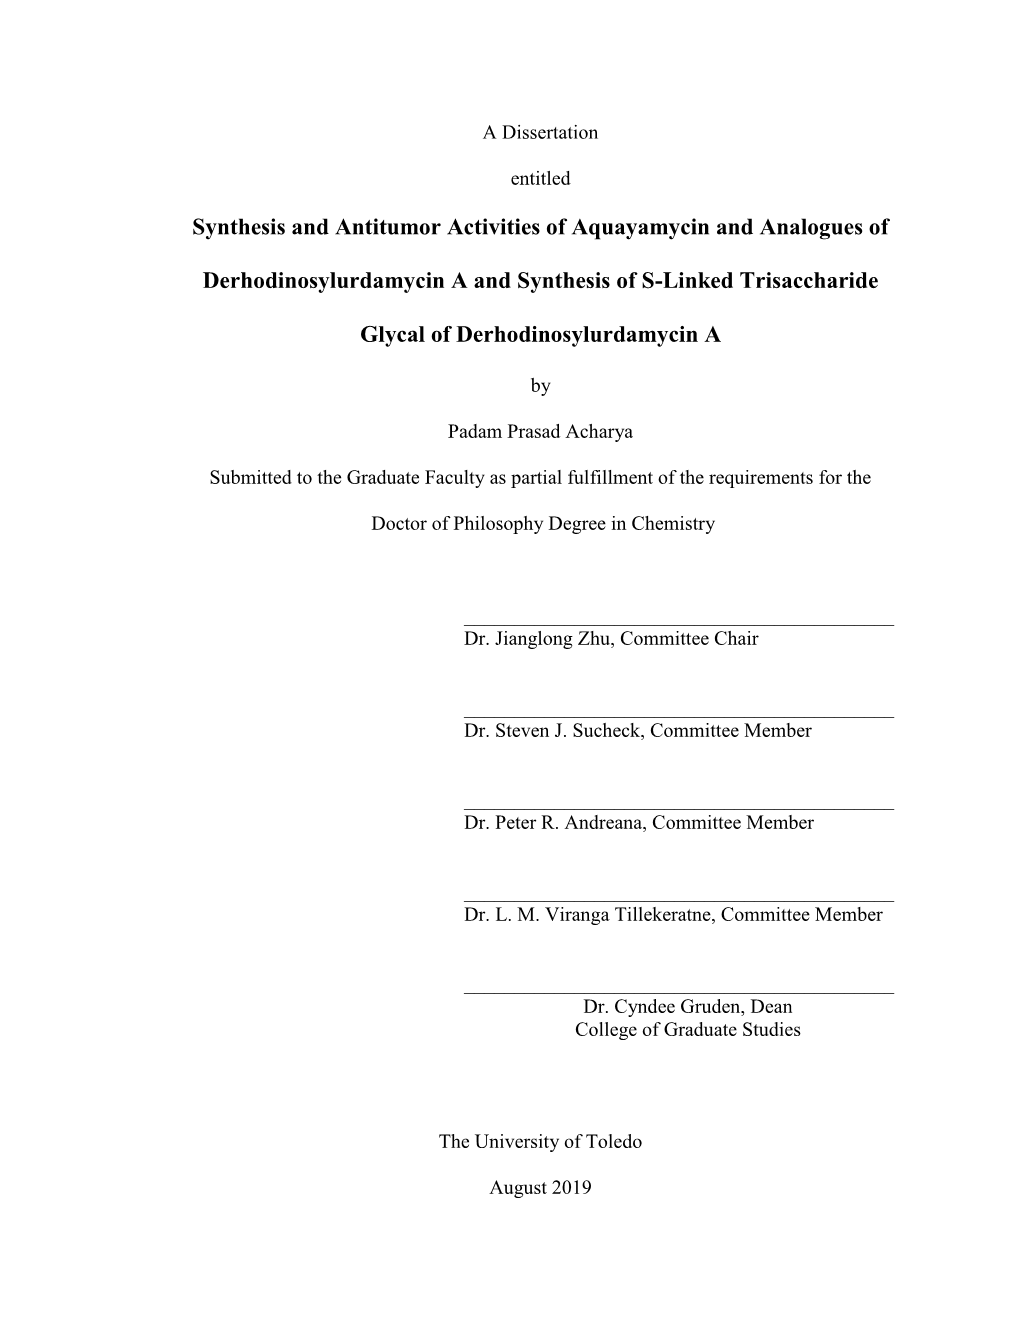 Synthesis and Antitumor Activities of Aquayamycin and Analogues Of